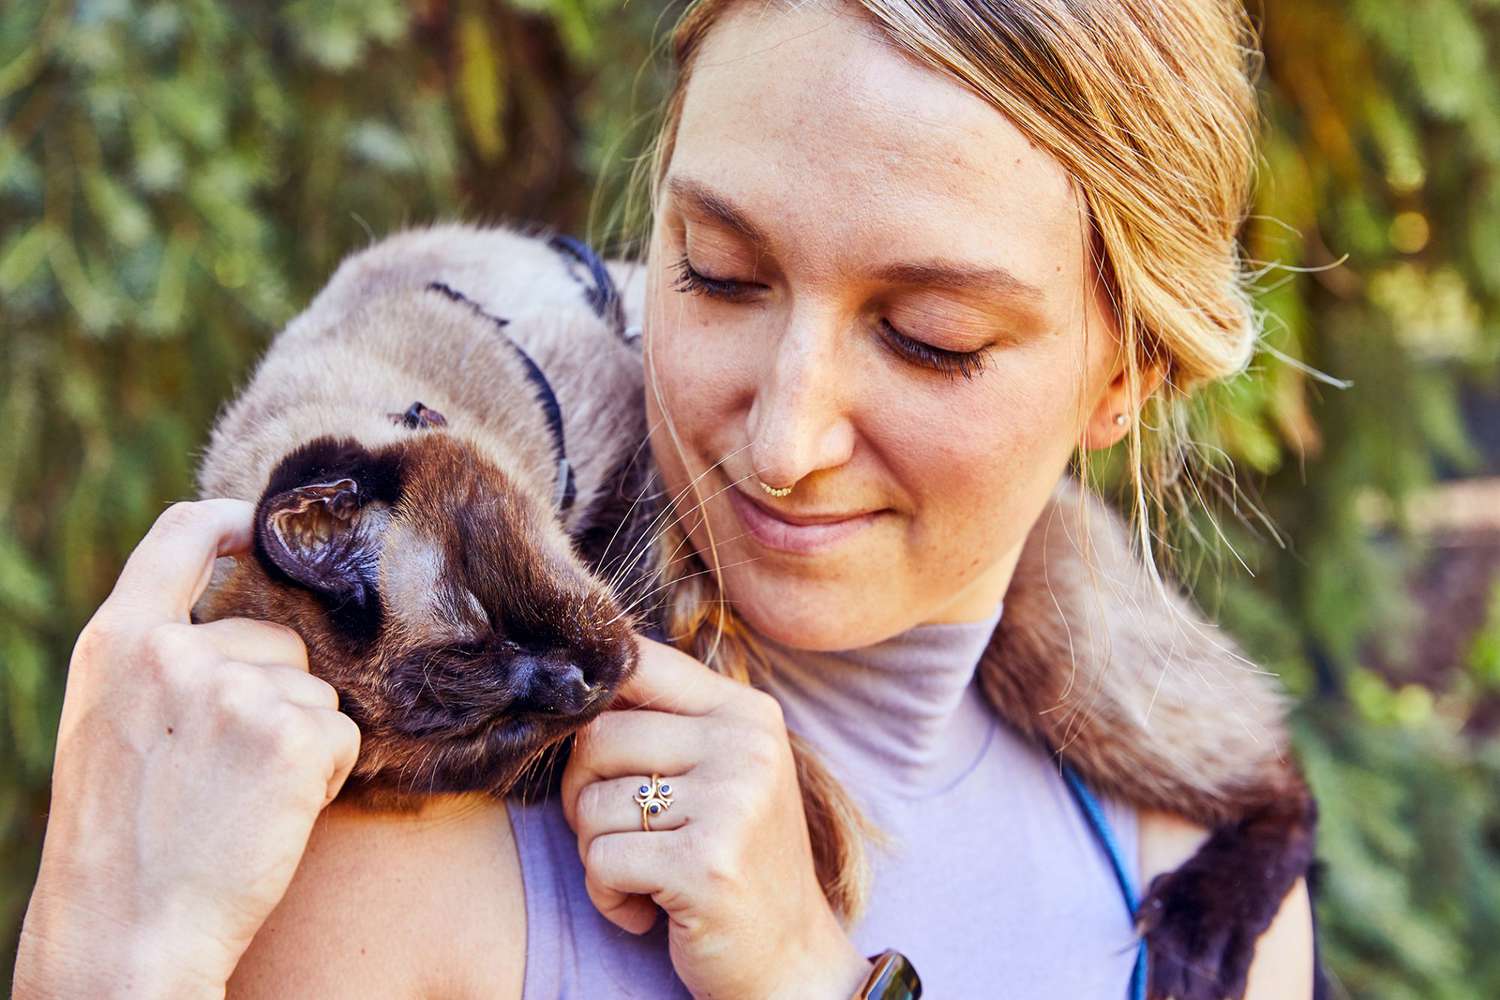 cat on woman's shoulder enjoying her affection; cats make great pets per science